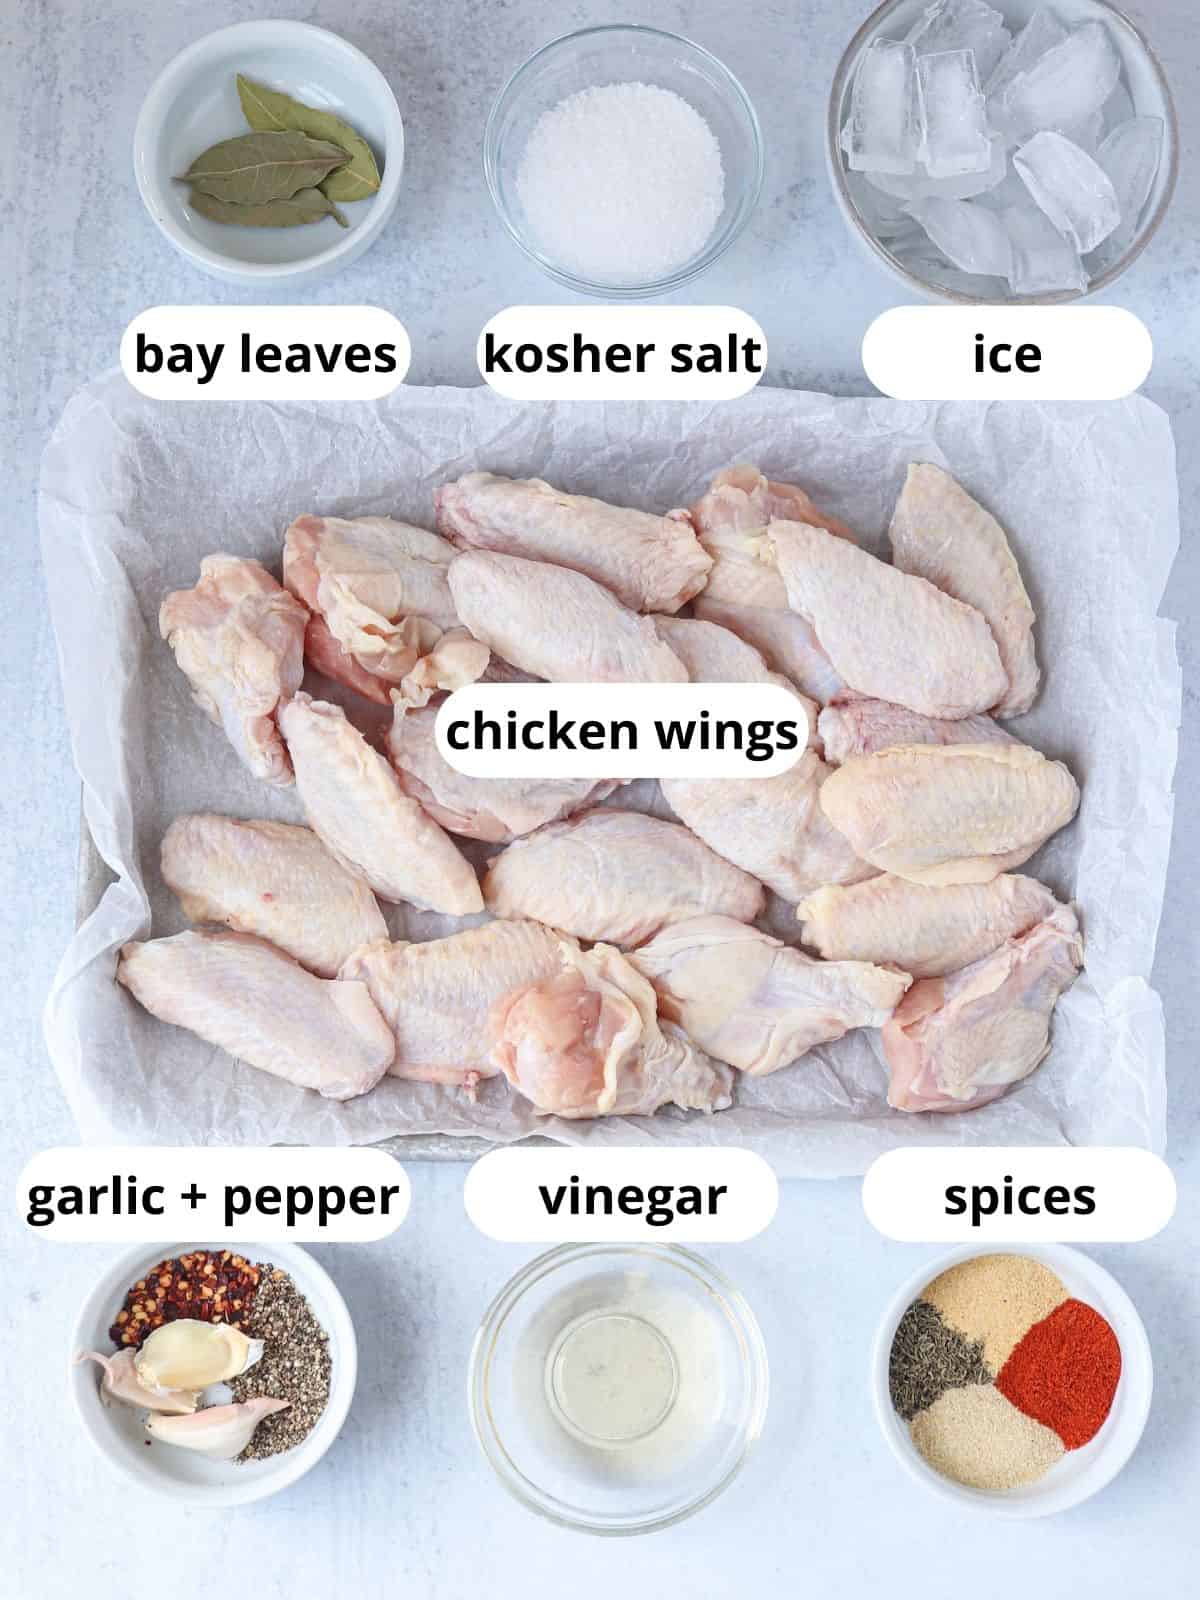 ingredients for brined chicken wings in containers on light gray surface.